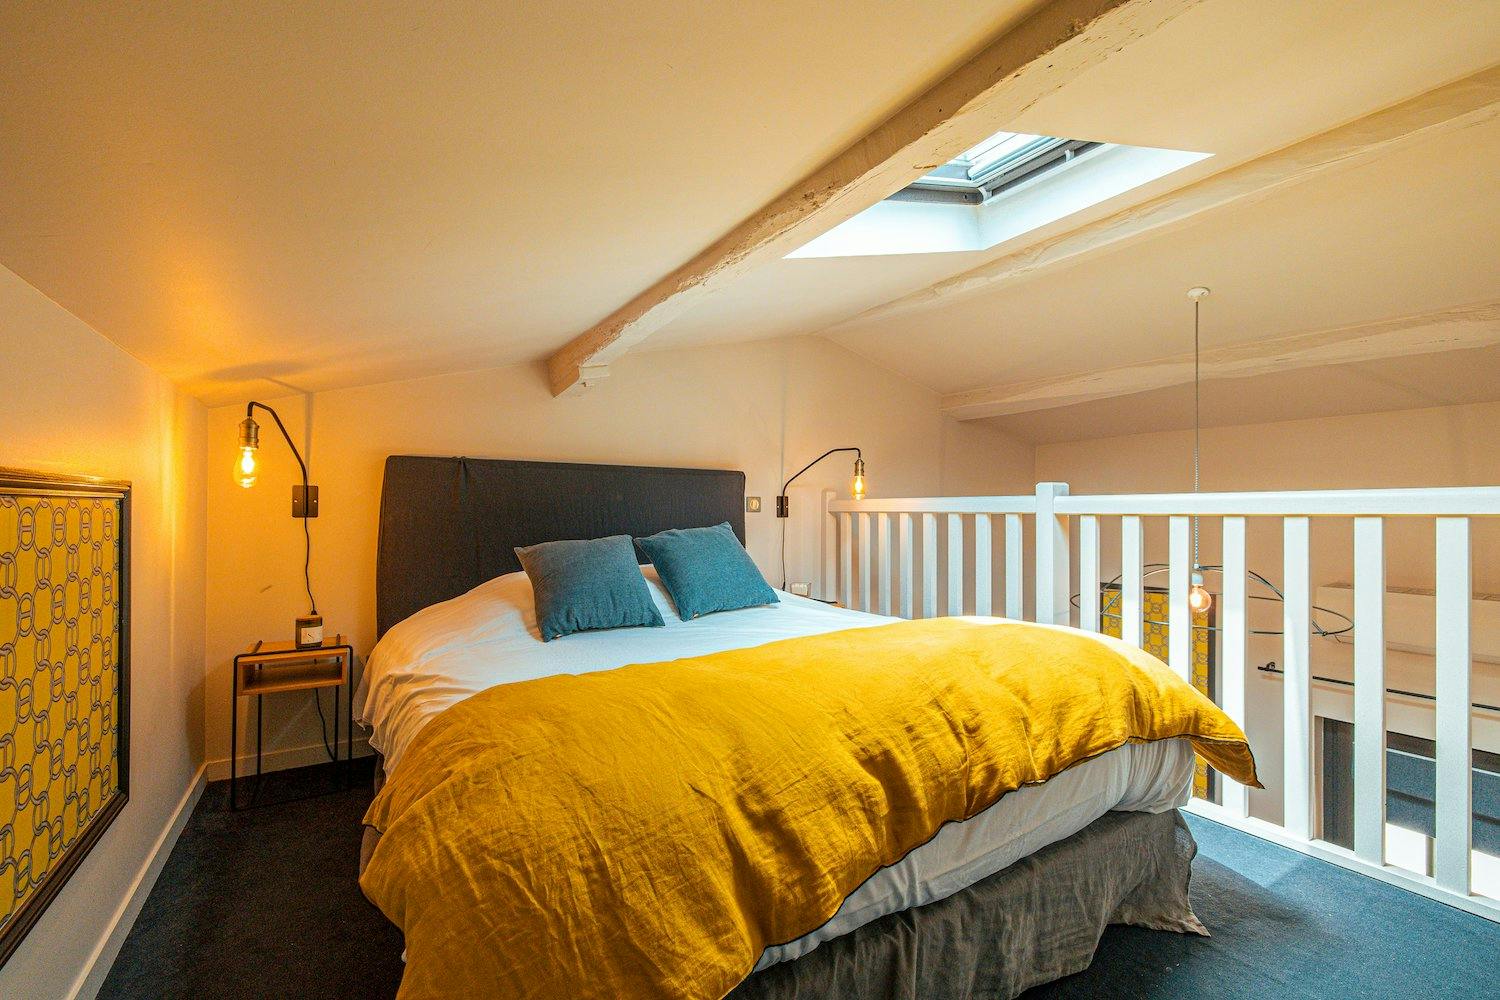 Room tucked away under the roof with velux window, yellow and blue sheets